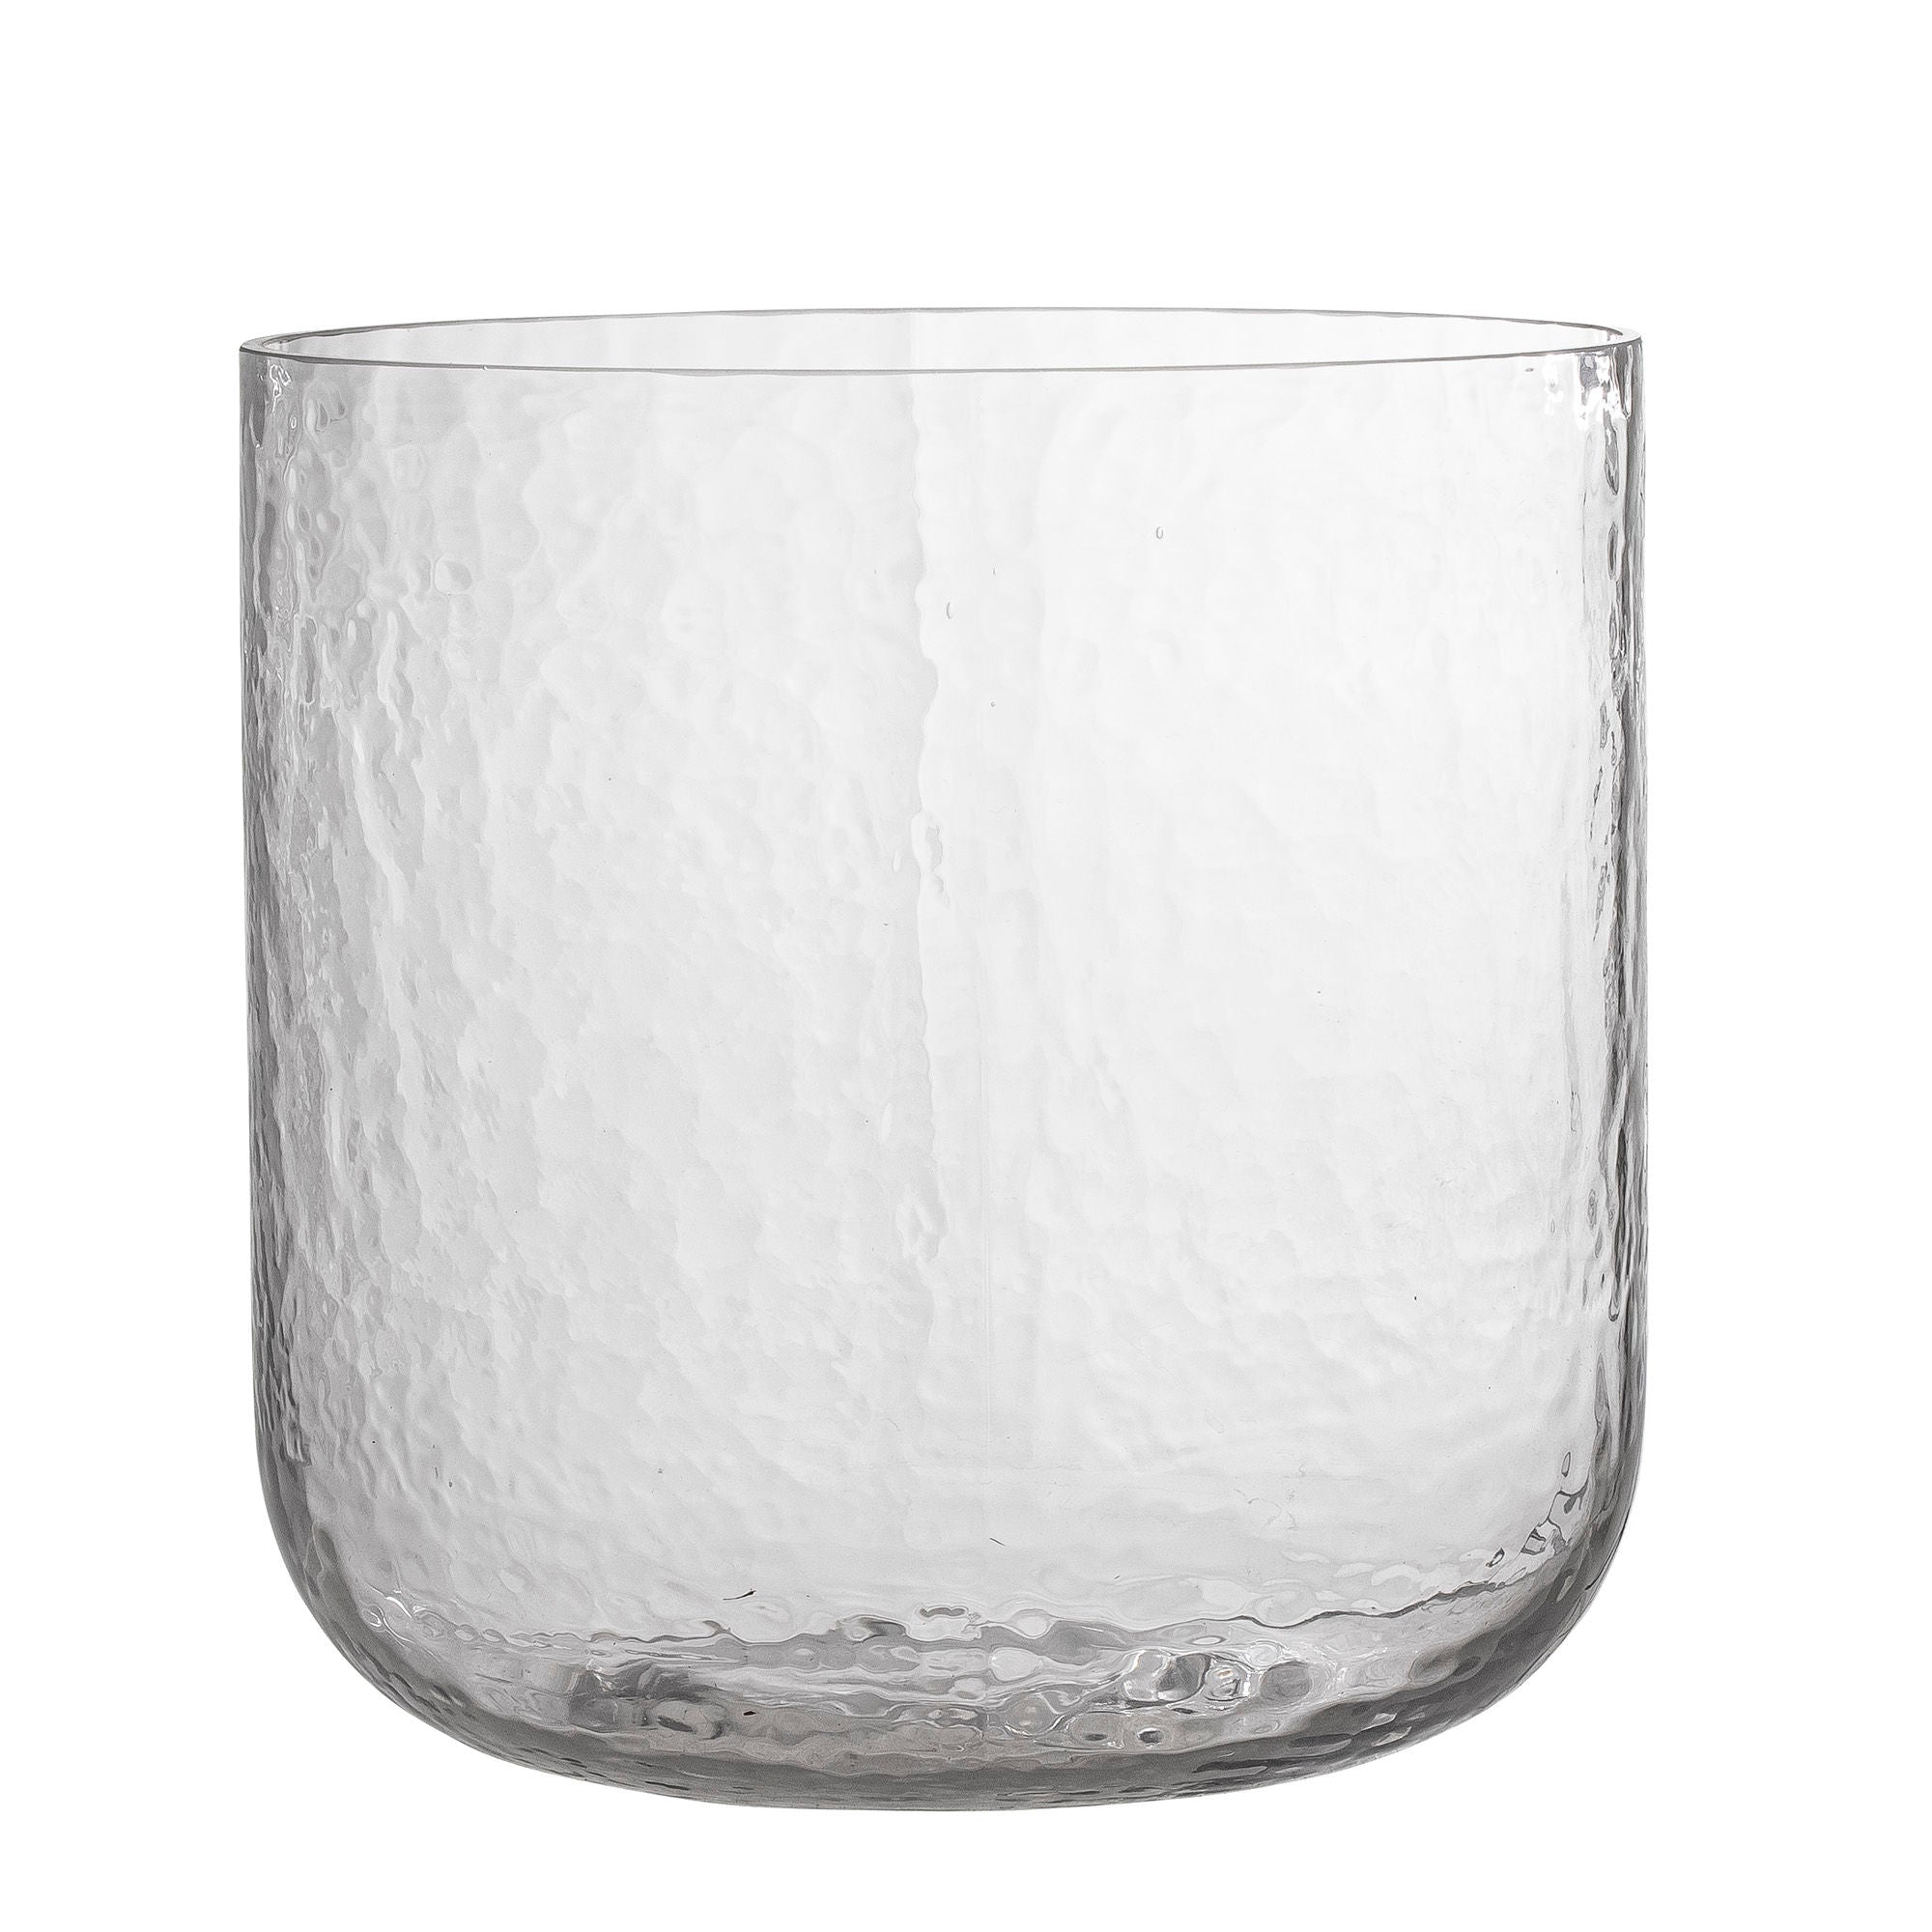 Bloomingville Didda Vase, Clear, Glass